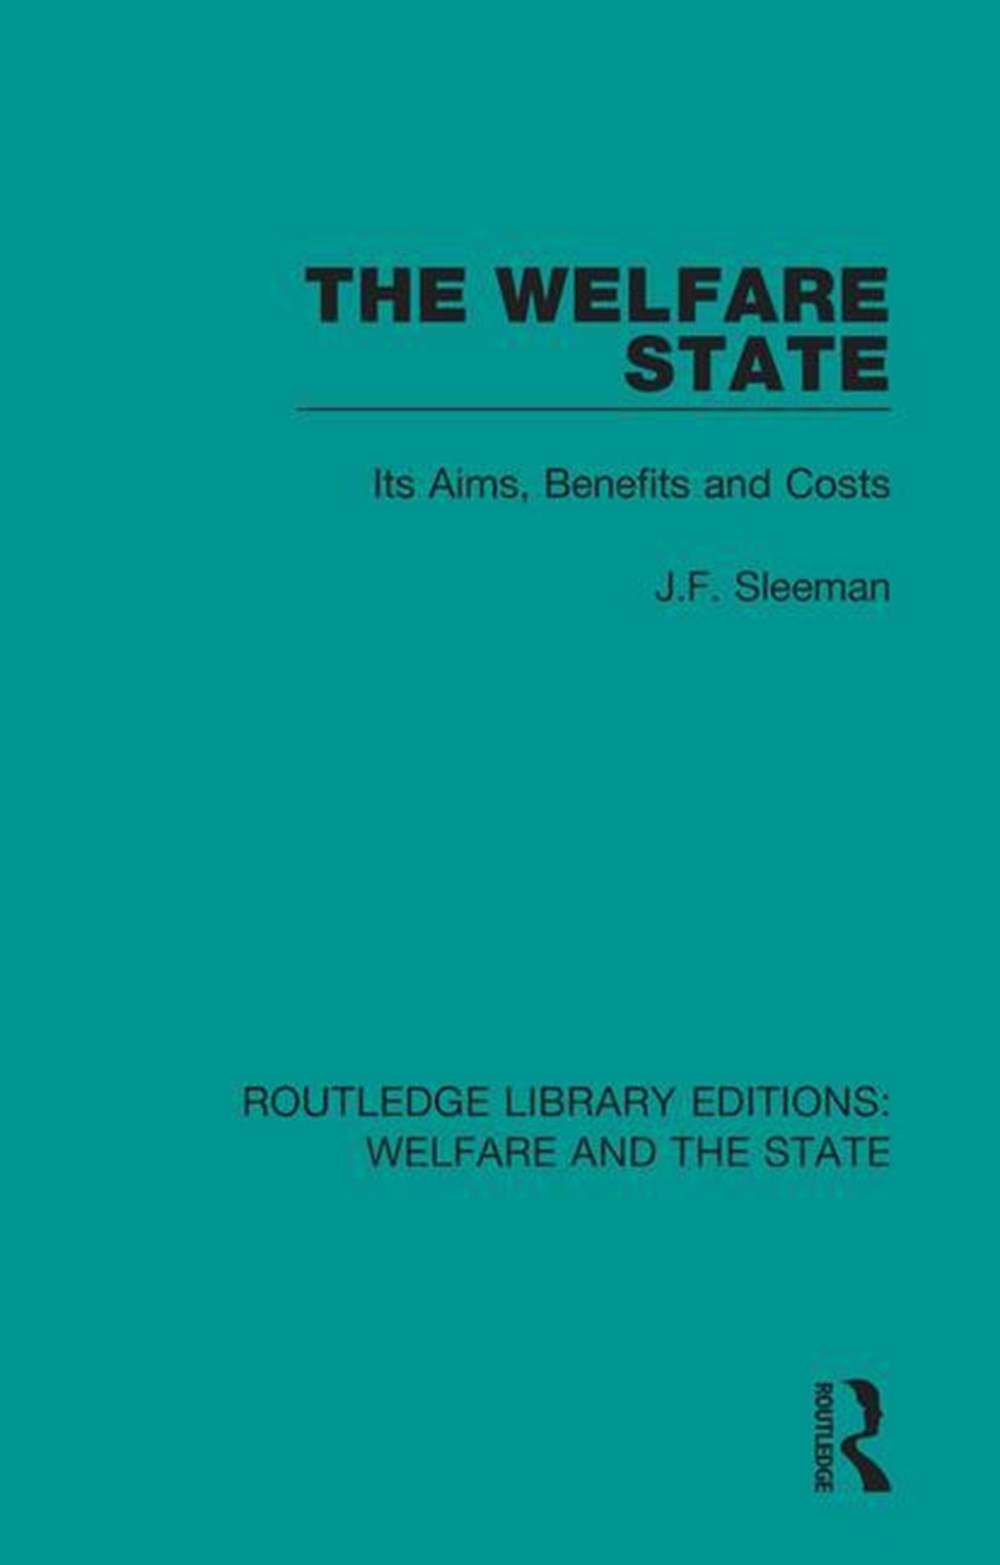 Welfare State Its Aims, Benefits and Costs